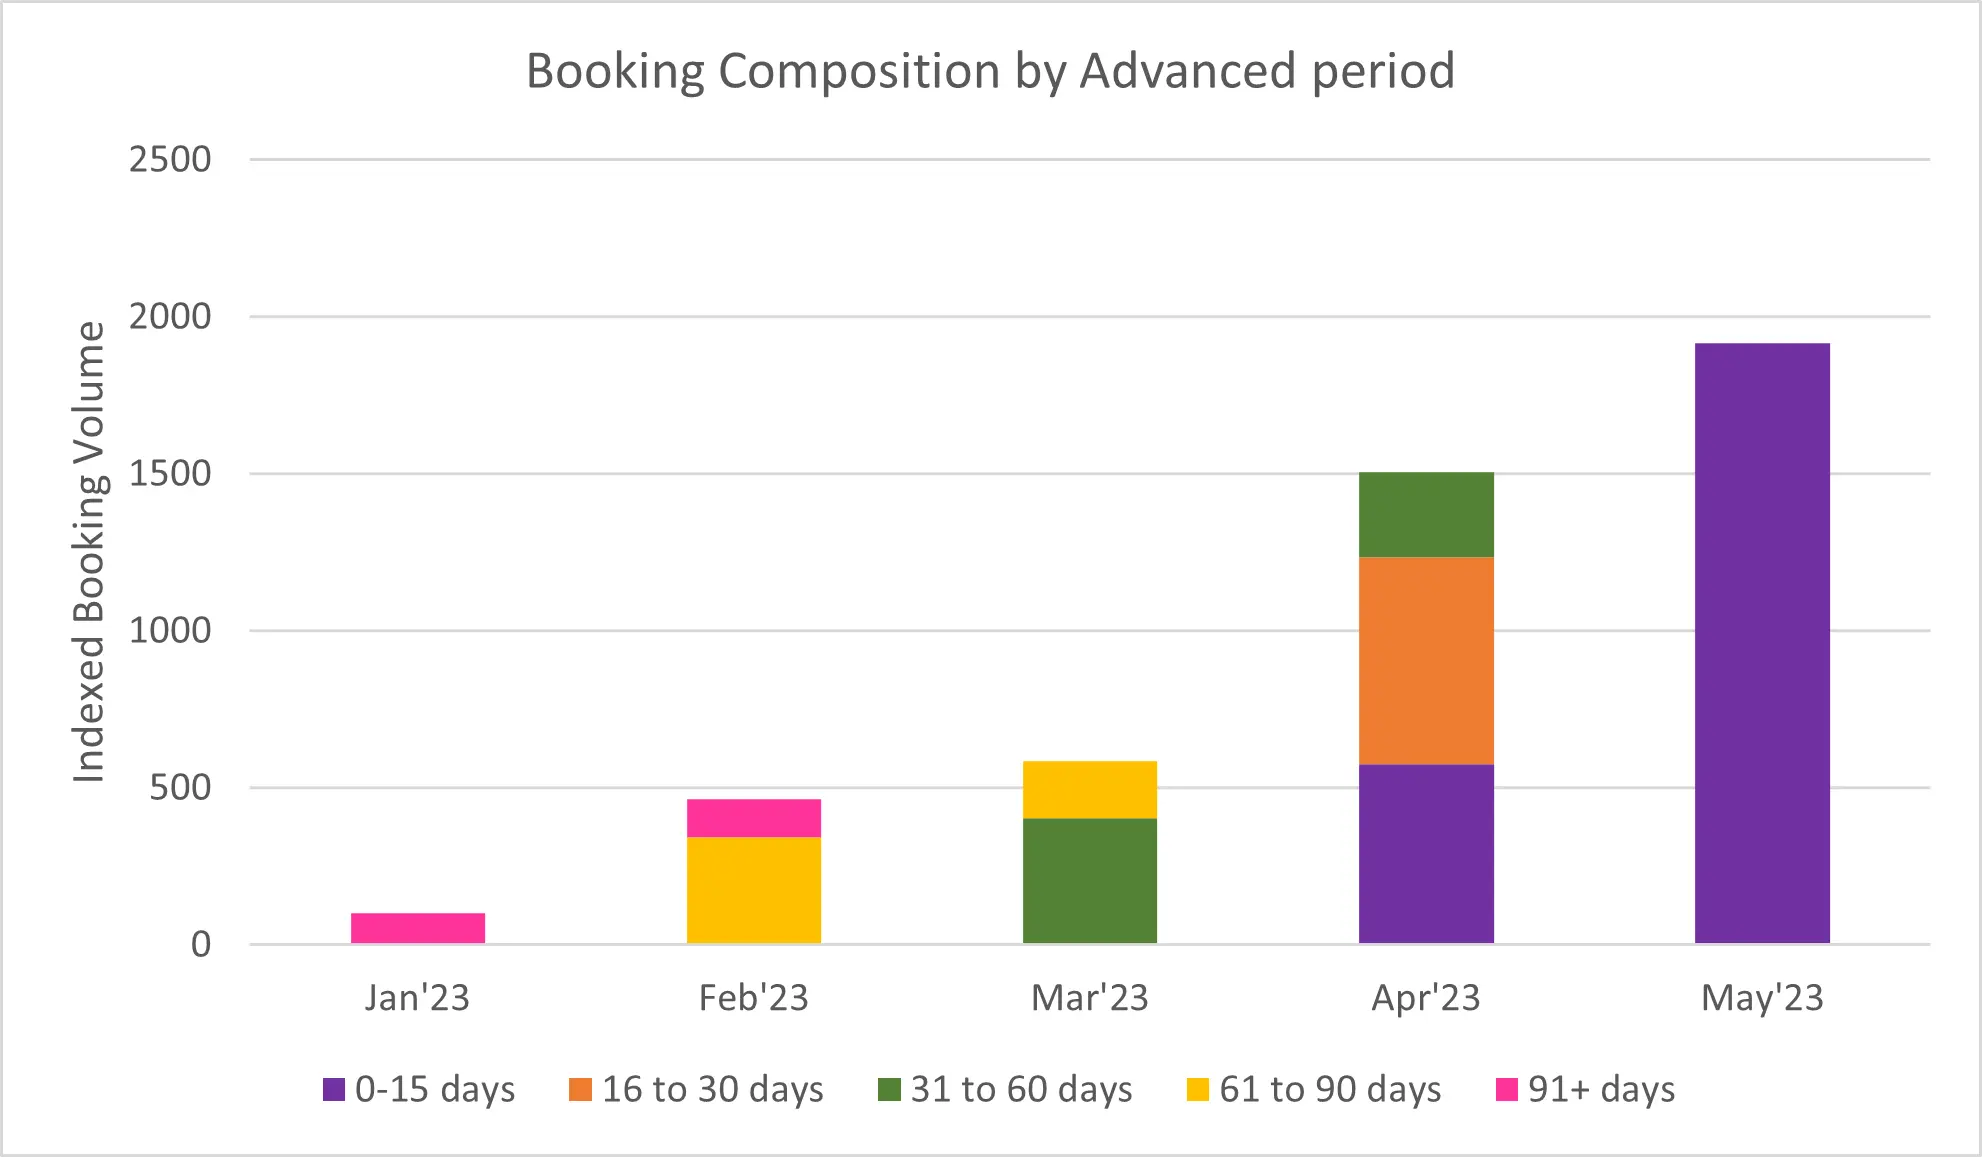 Booking Composition by Advanced Period